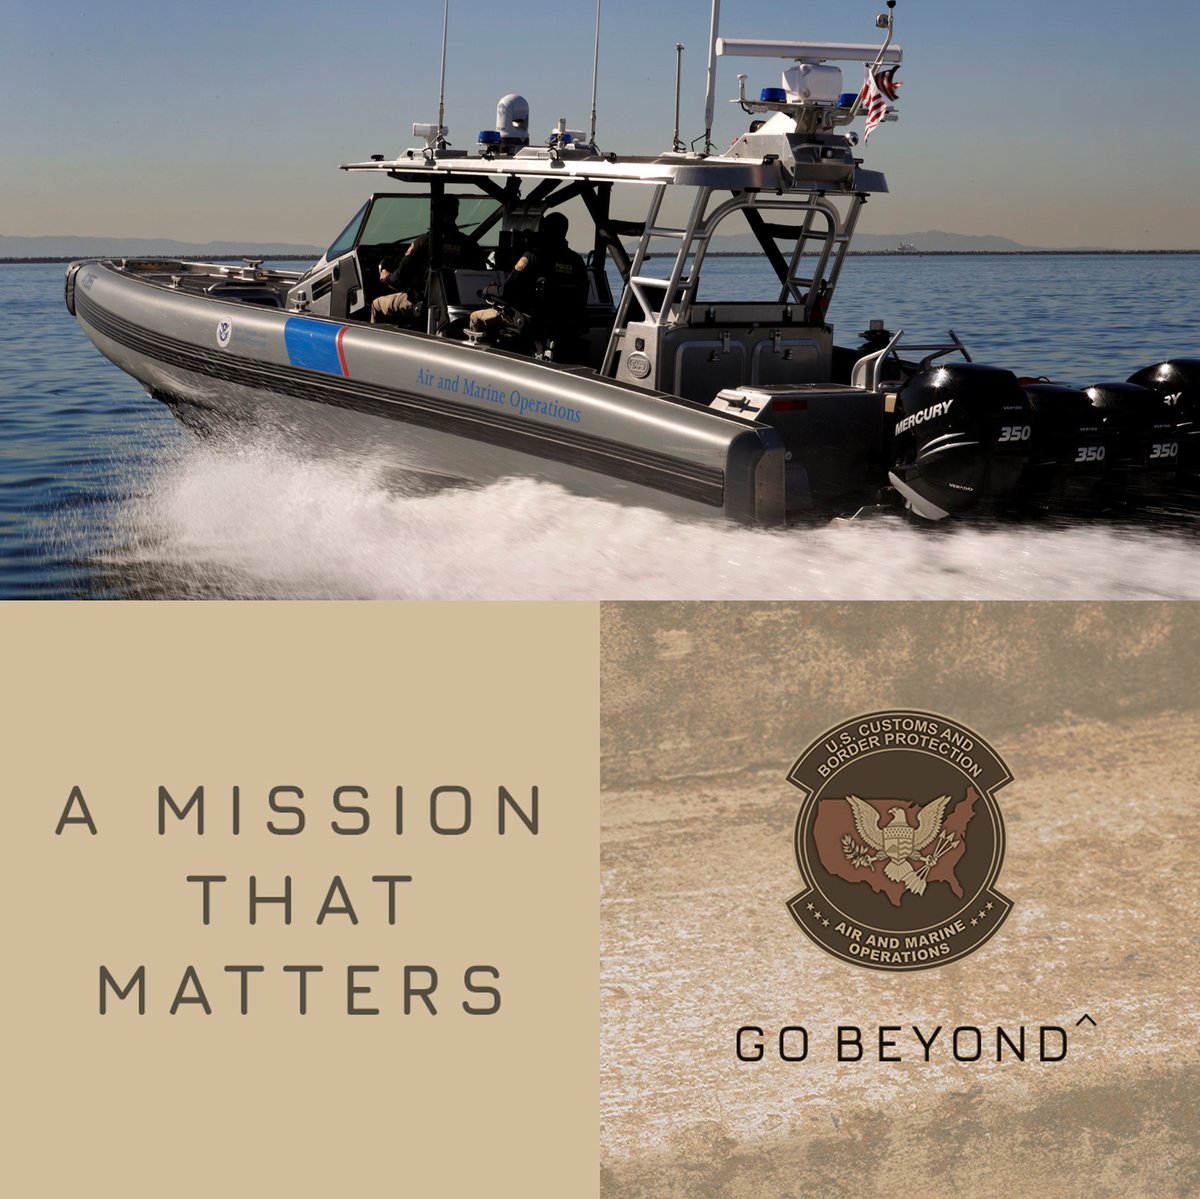 Navigate your course toward a mission that matters as a Marine Interdiction Agent. Air and Marine Operations is seeking candidates to help secure our coastal waters and protect our communities. Go beyond: go.dhs.gov/oBm #CBPCareers #NowHiring